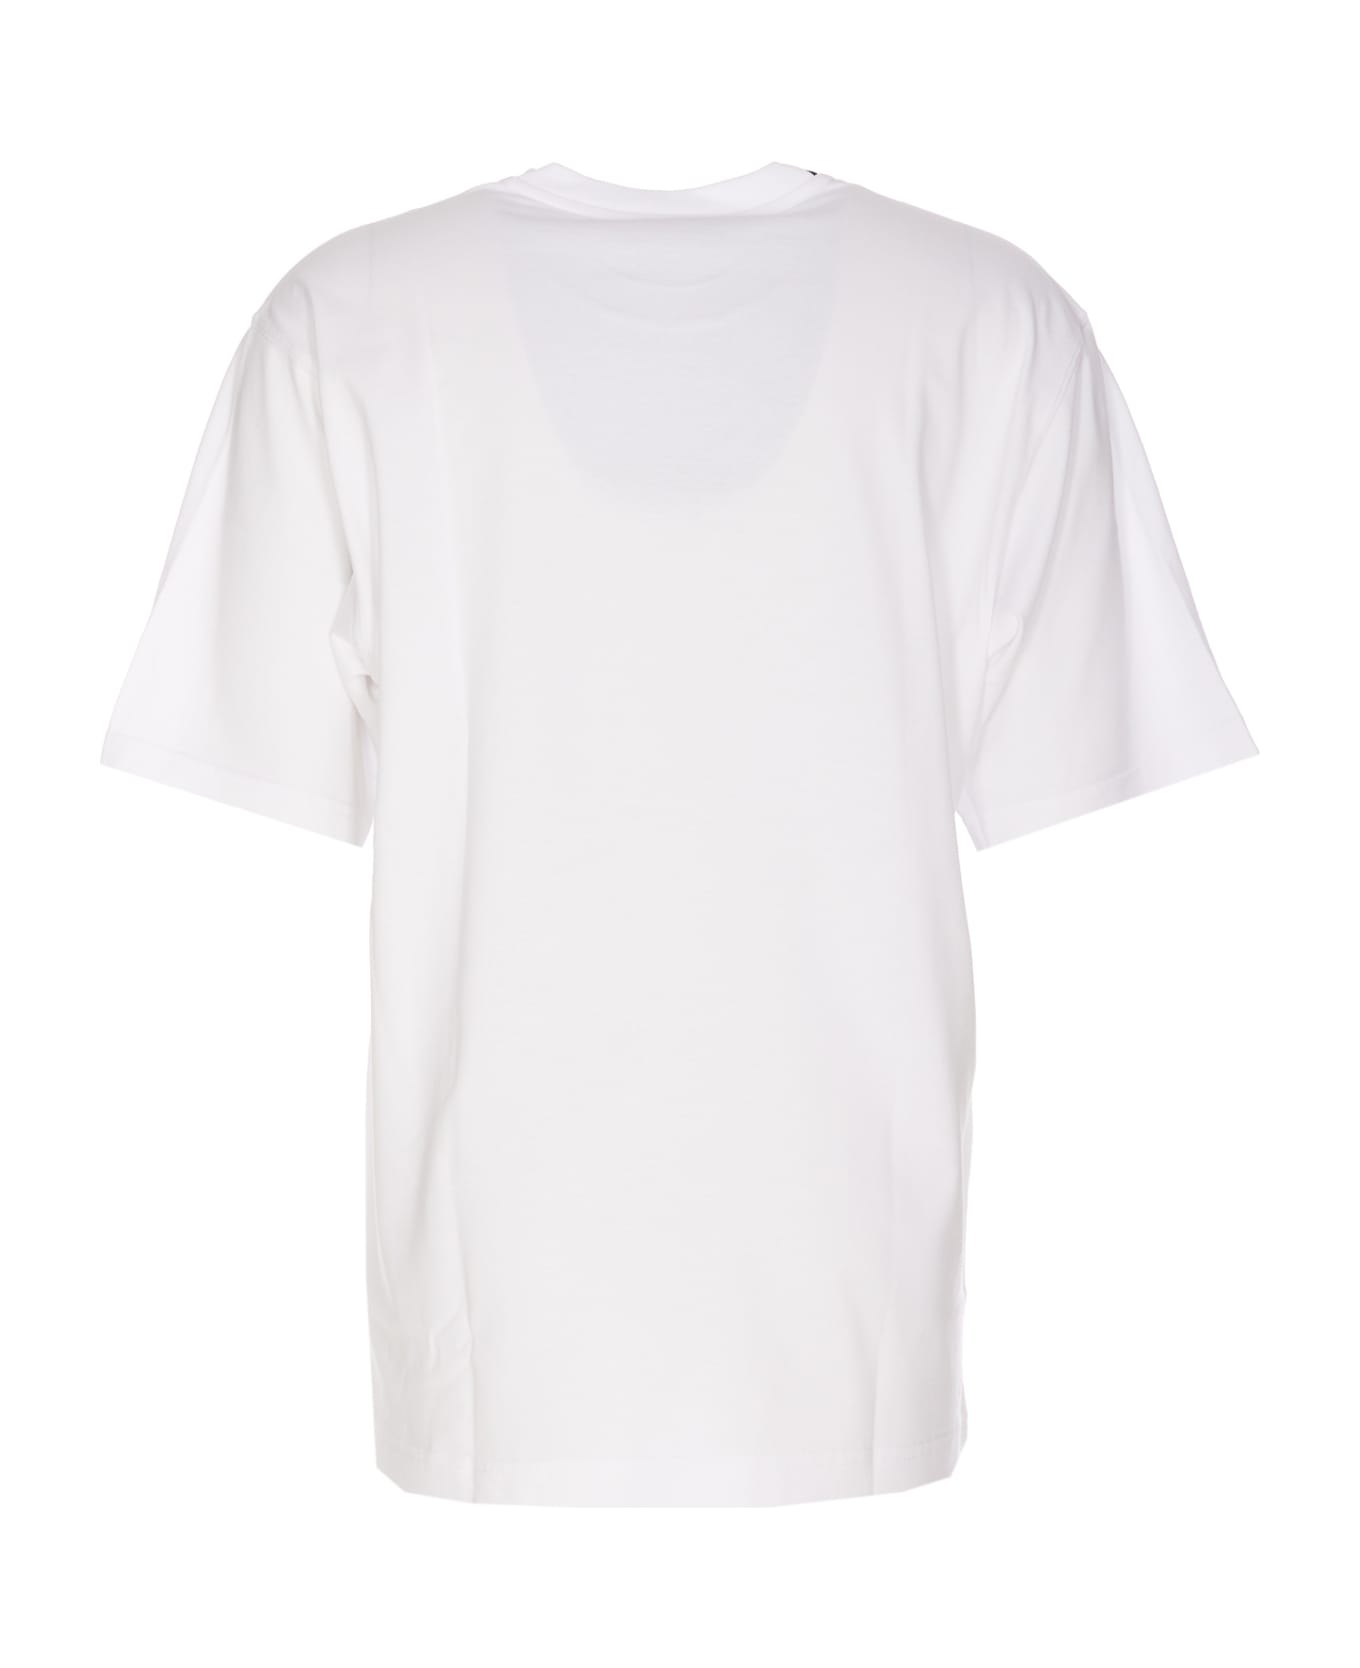 Dolce & Gabbana Printed T-shirt With Termostrass - White シャツ